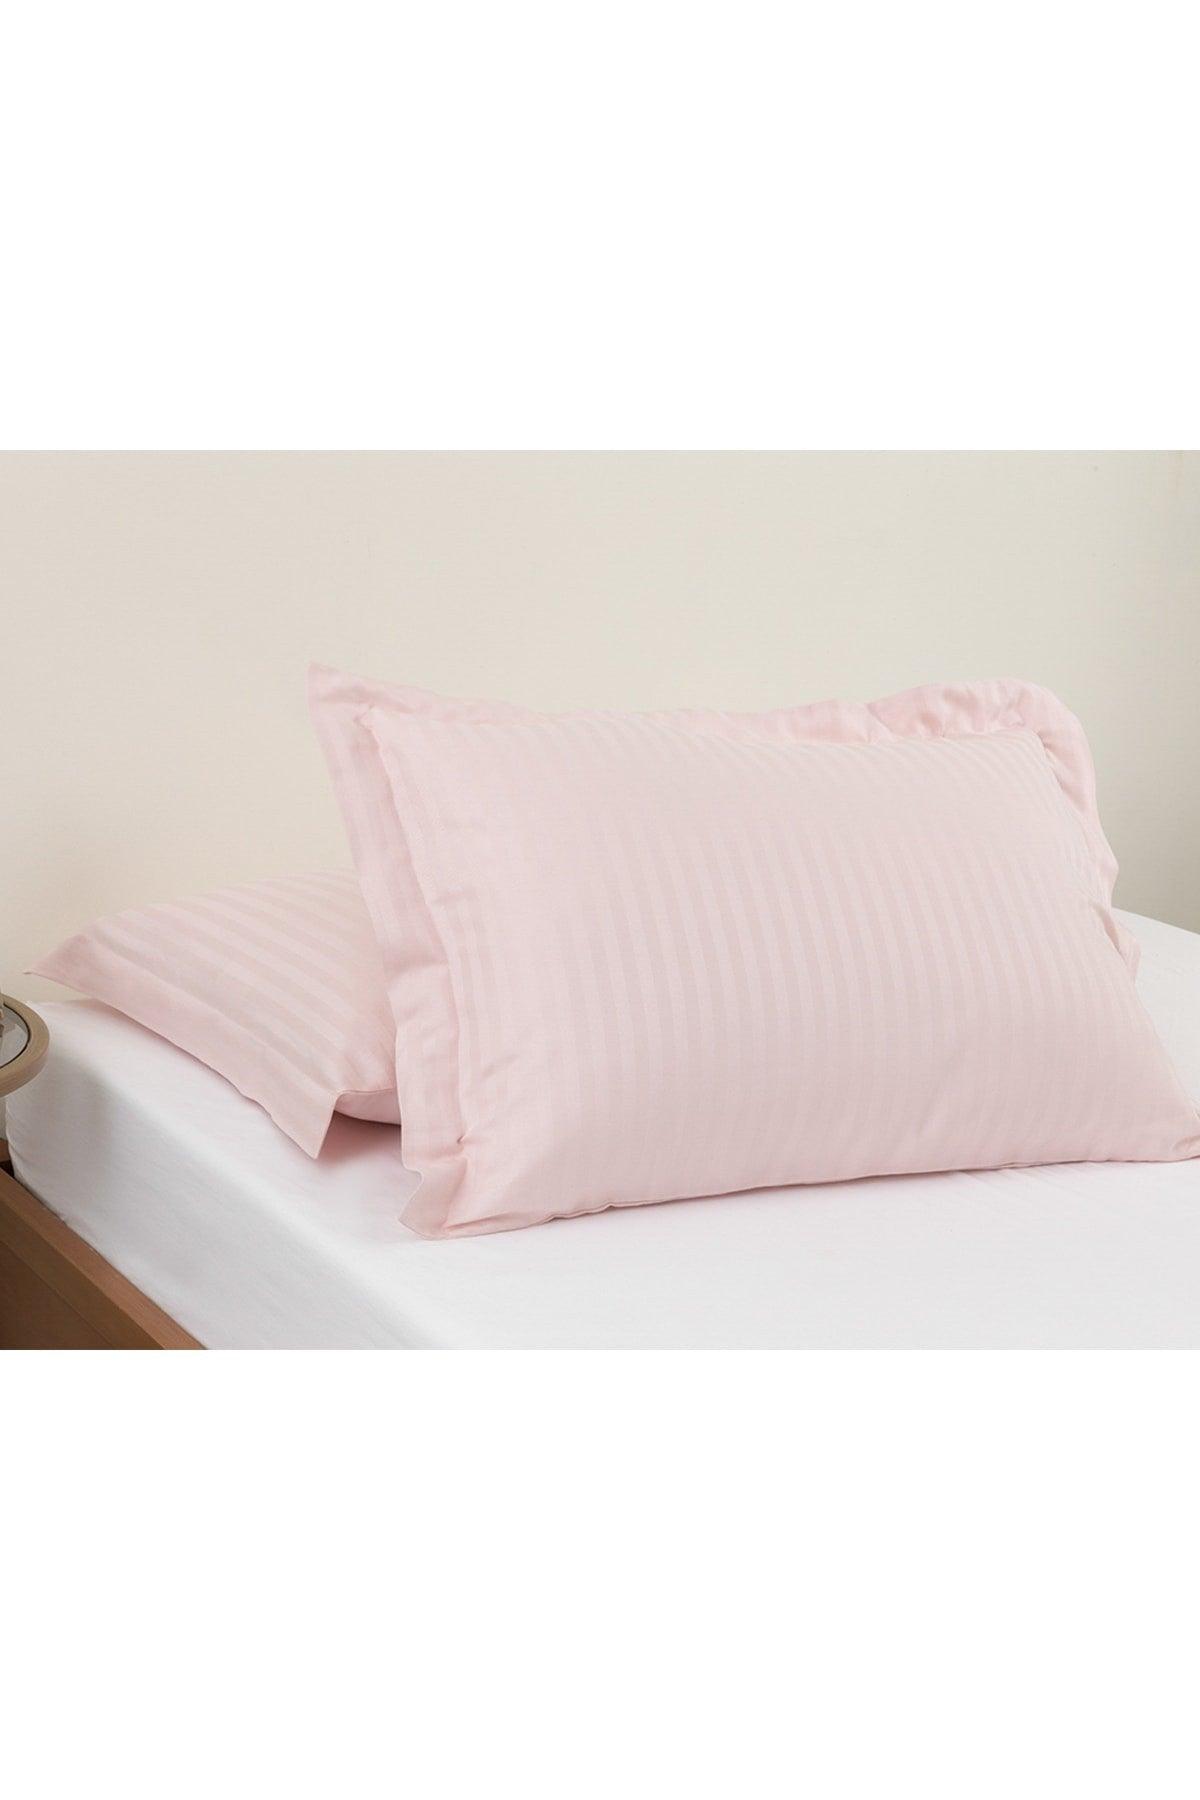 Crystal Silky Twill Pillow Cover with 2 Ears 50x70 Cm Pink - Swordslife